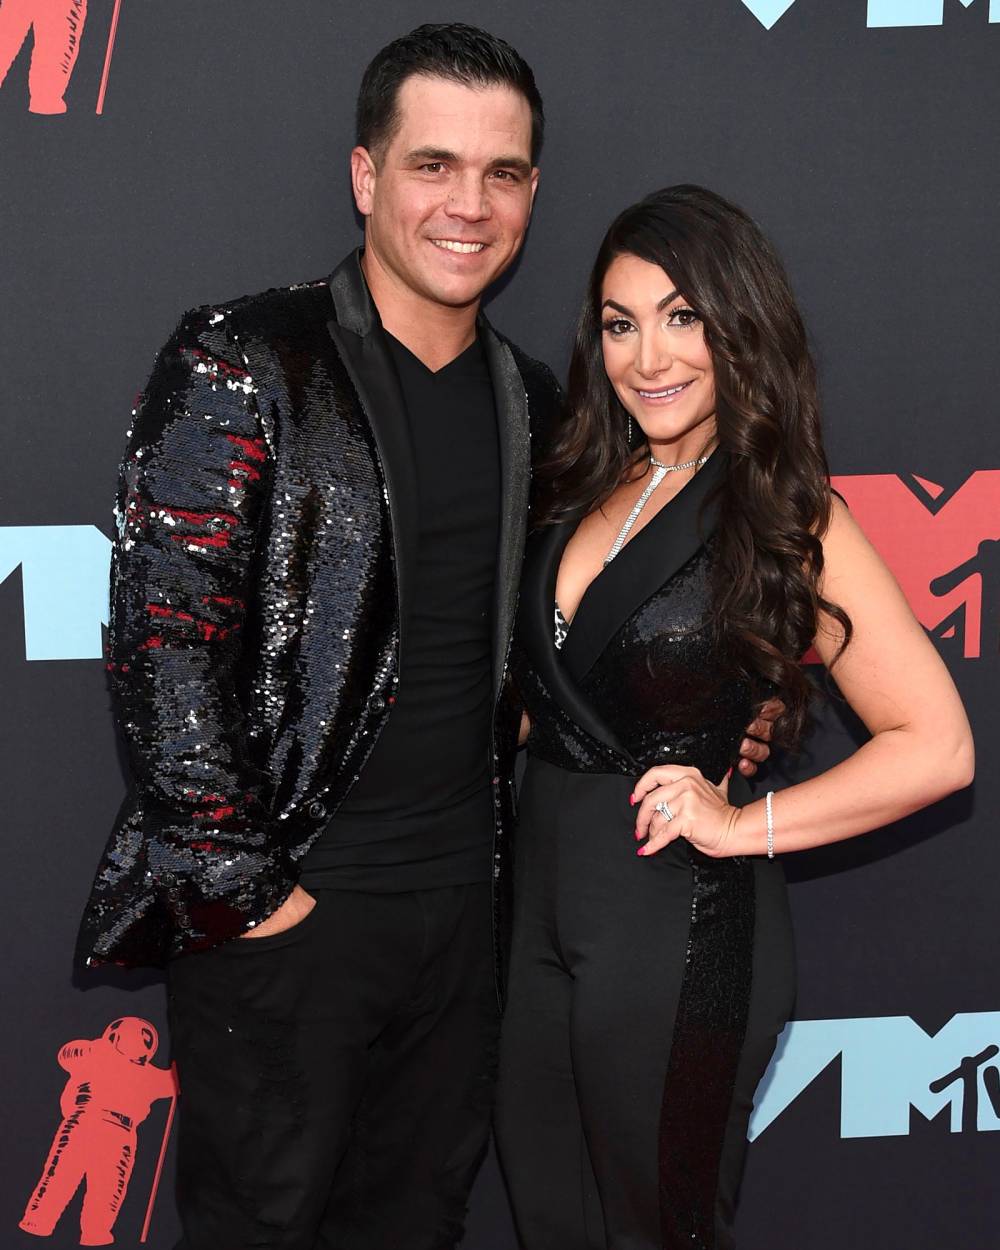 Jersey Shore’s Deena Cortese Gives Birth, Welcomes 2nd Child With Husband Christopher Buckner